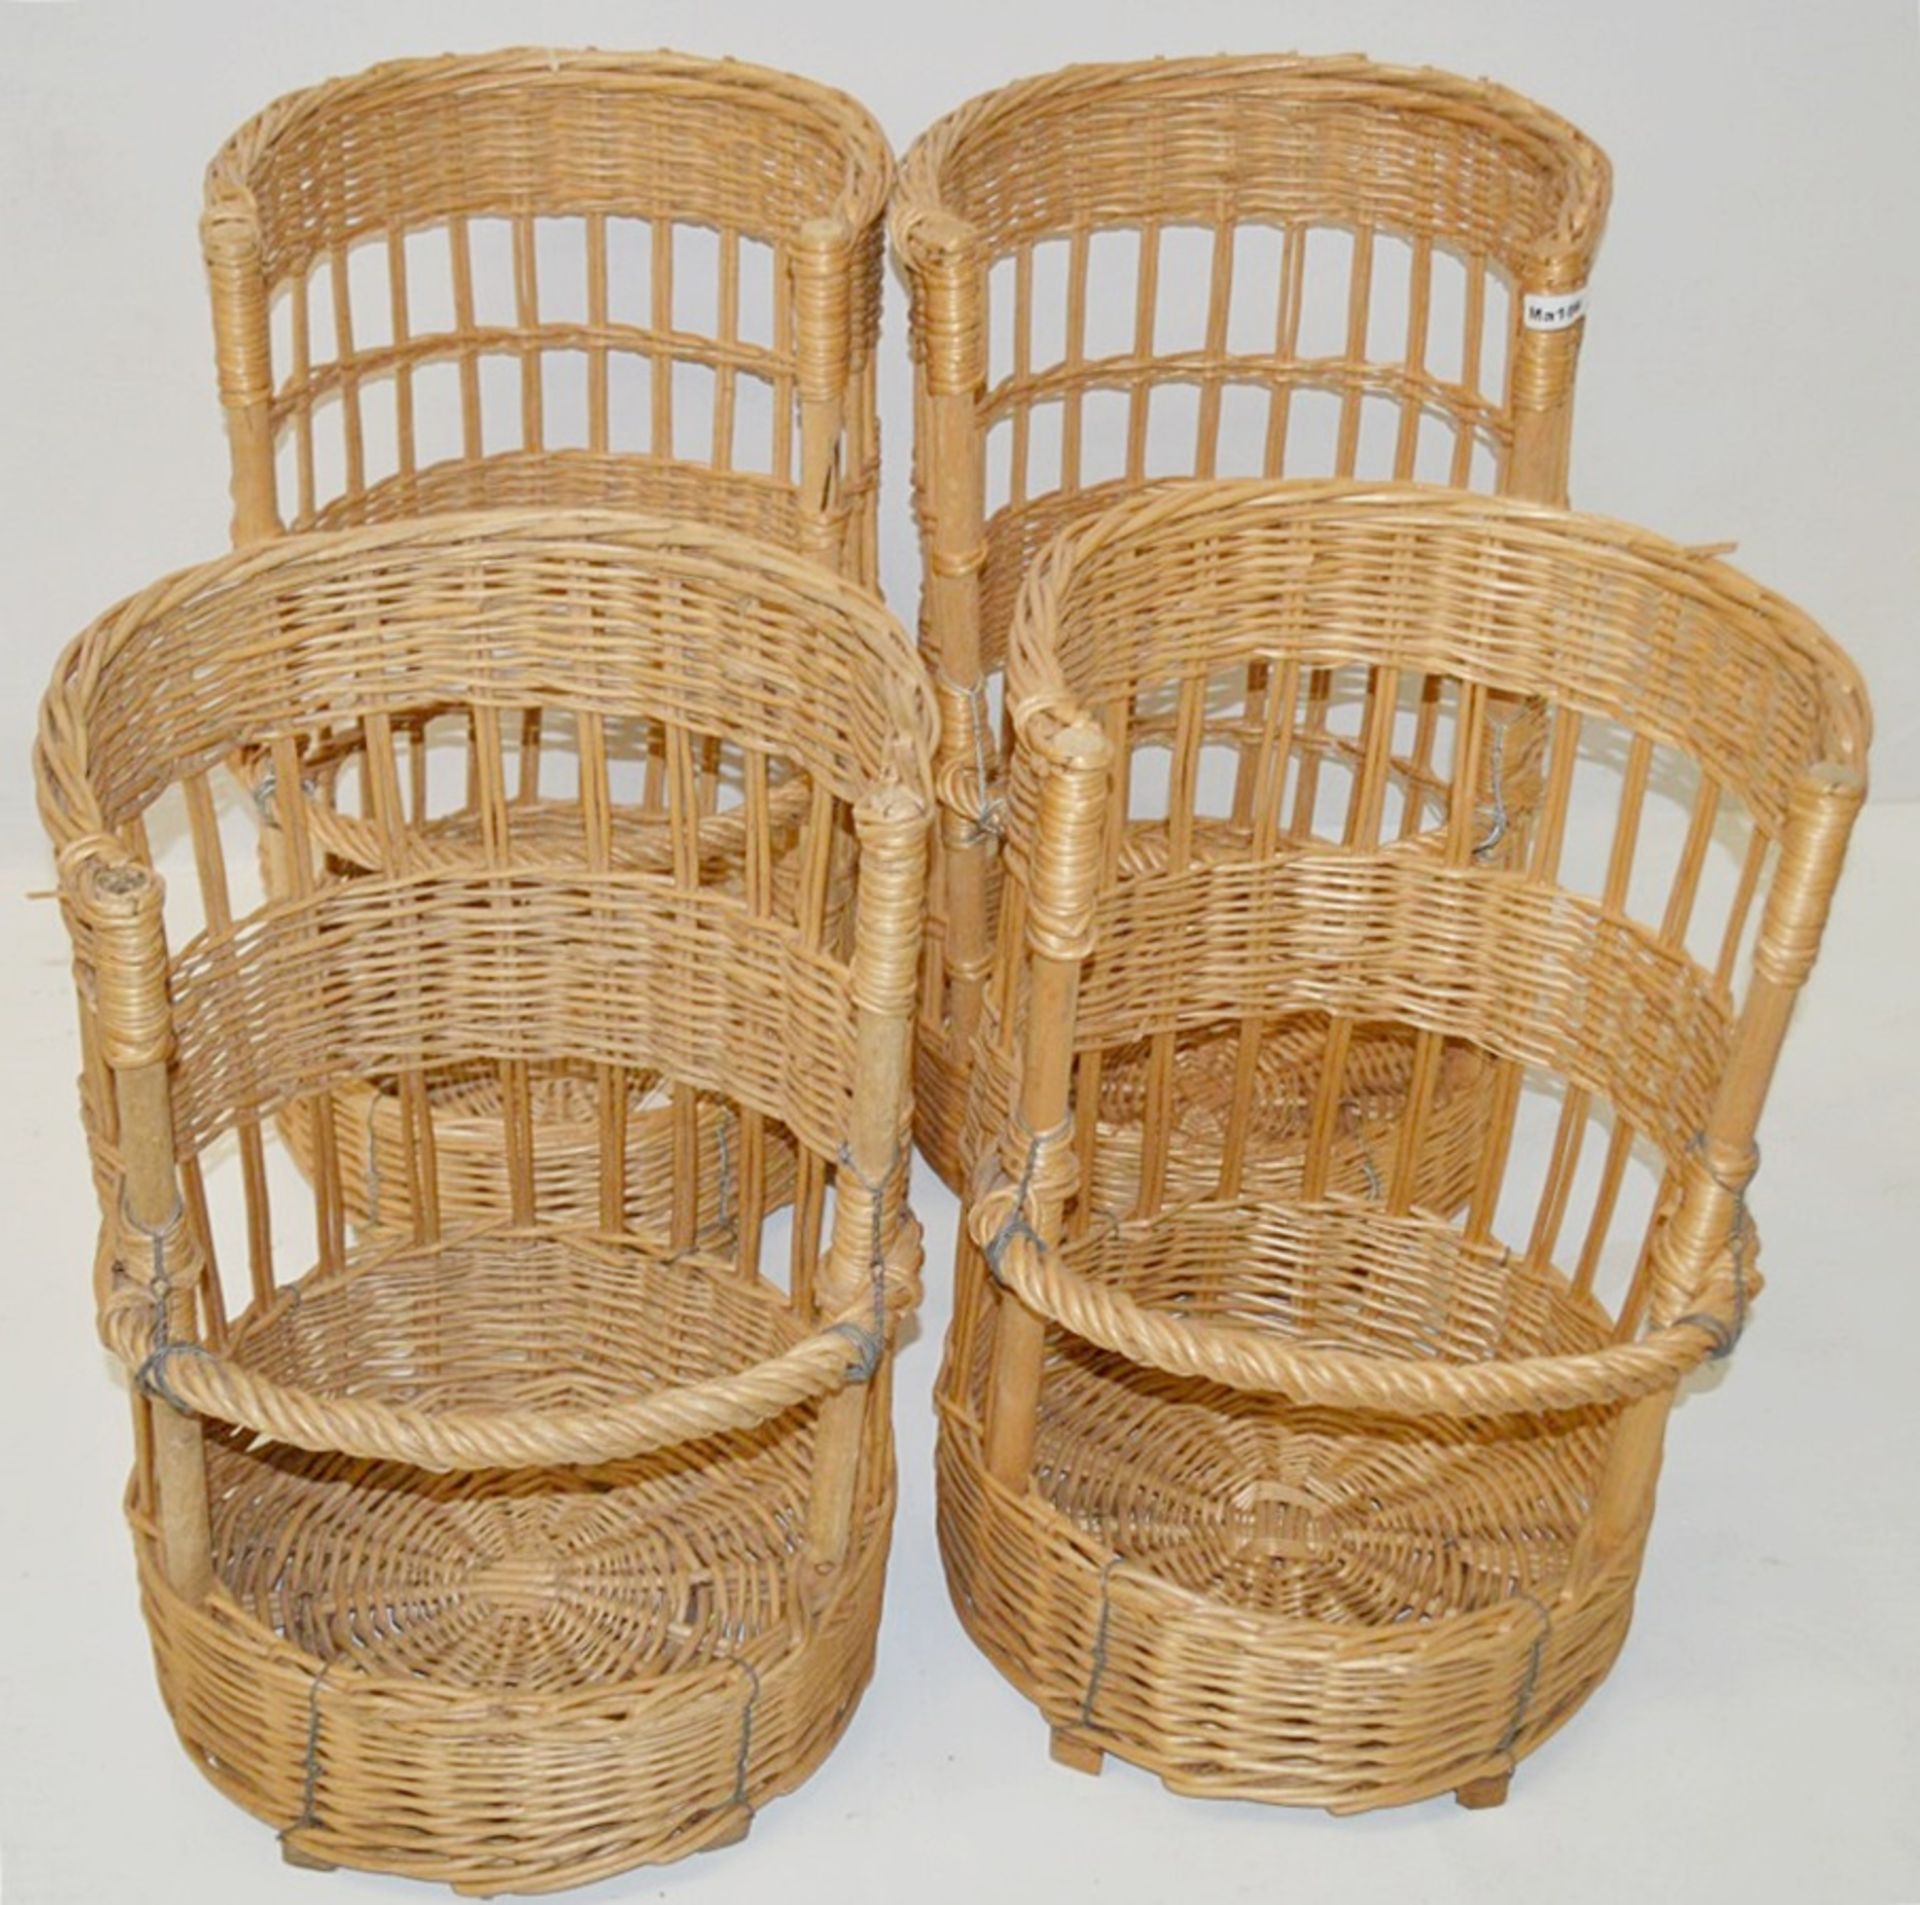 5 x Traditional French Bread Bagette Wicker Baskets - Dimensions: Diameter 45cm / Height 63cm -